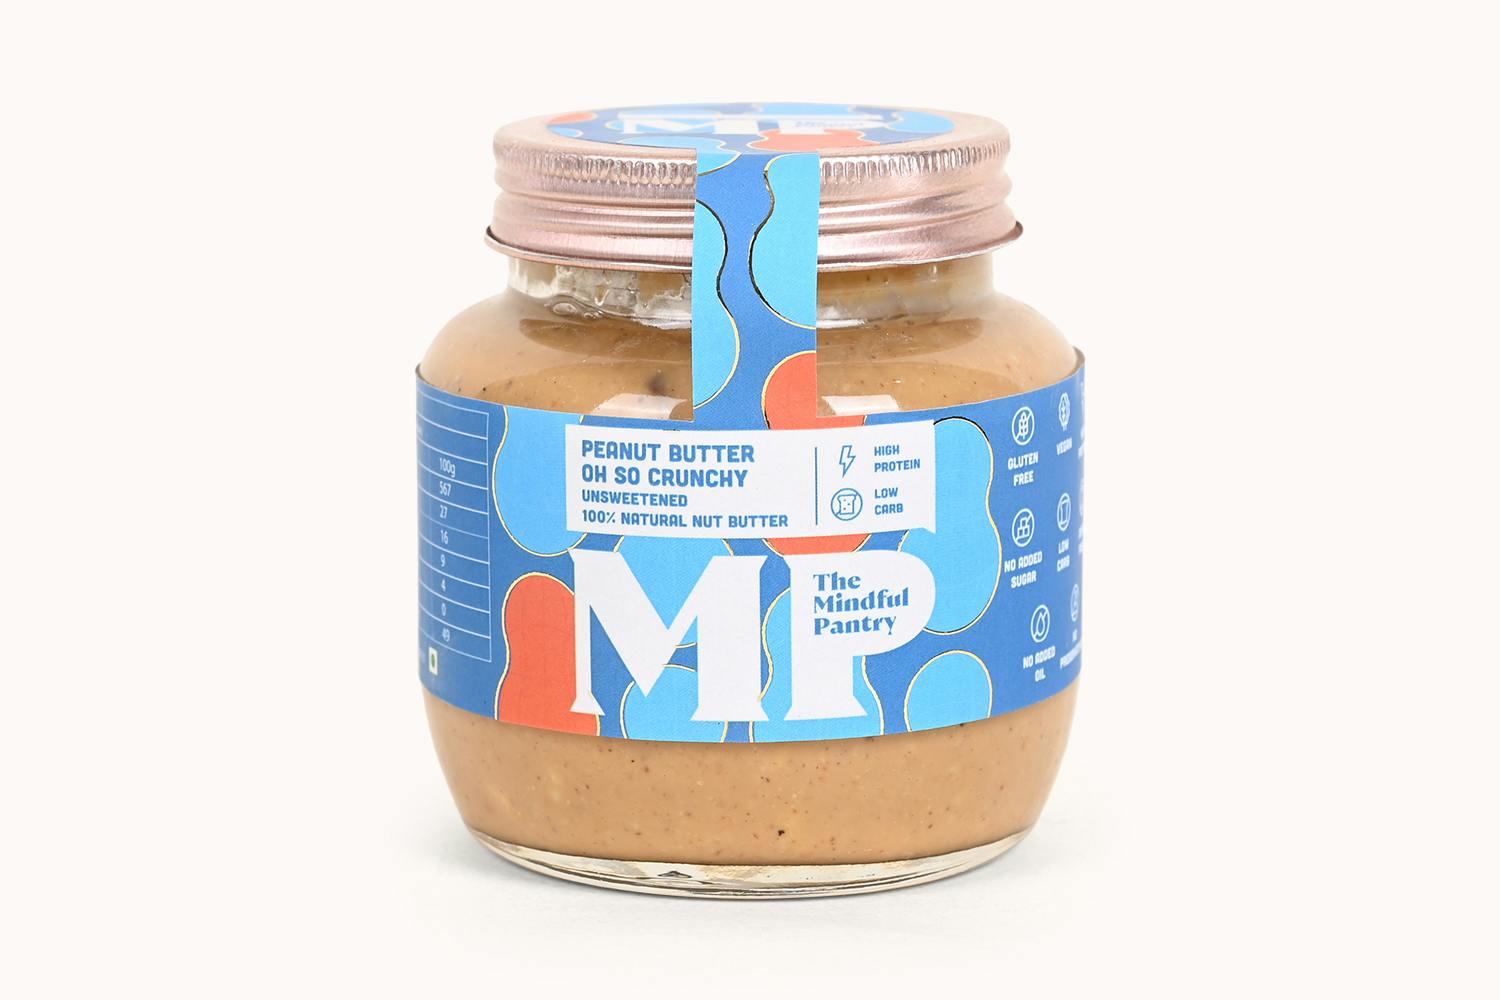 The Mindful Pantry Peanut Butter - Crunchy